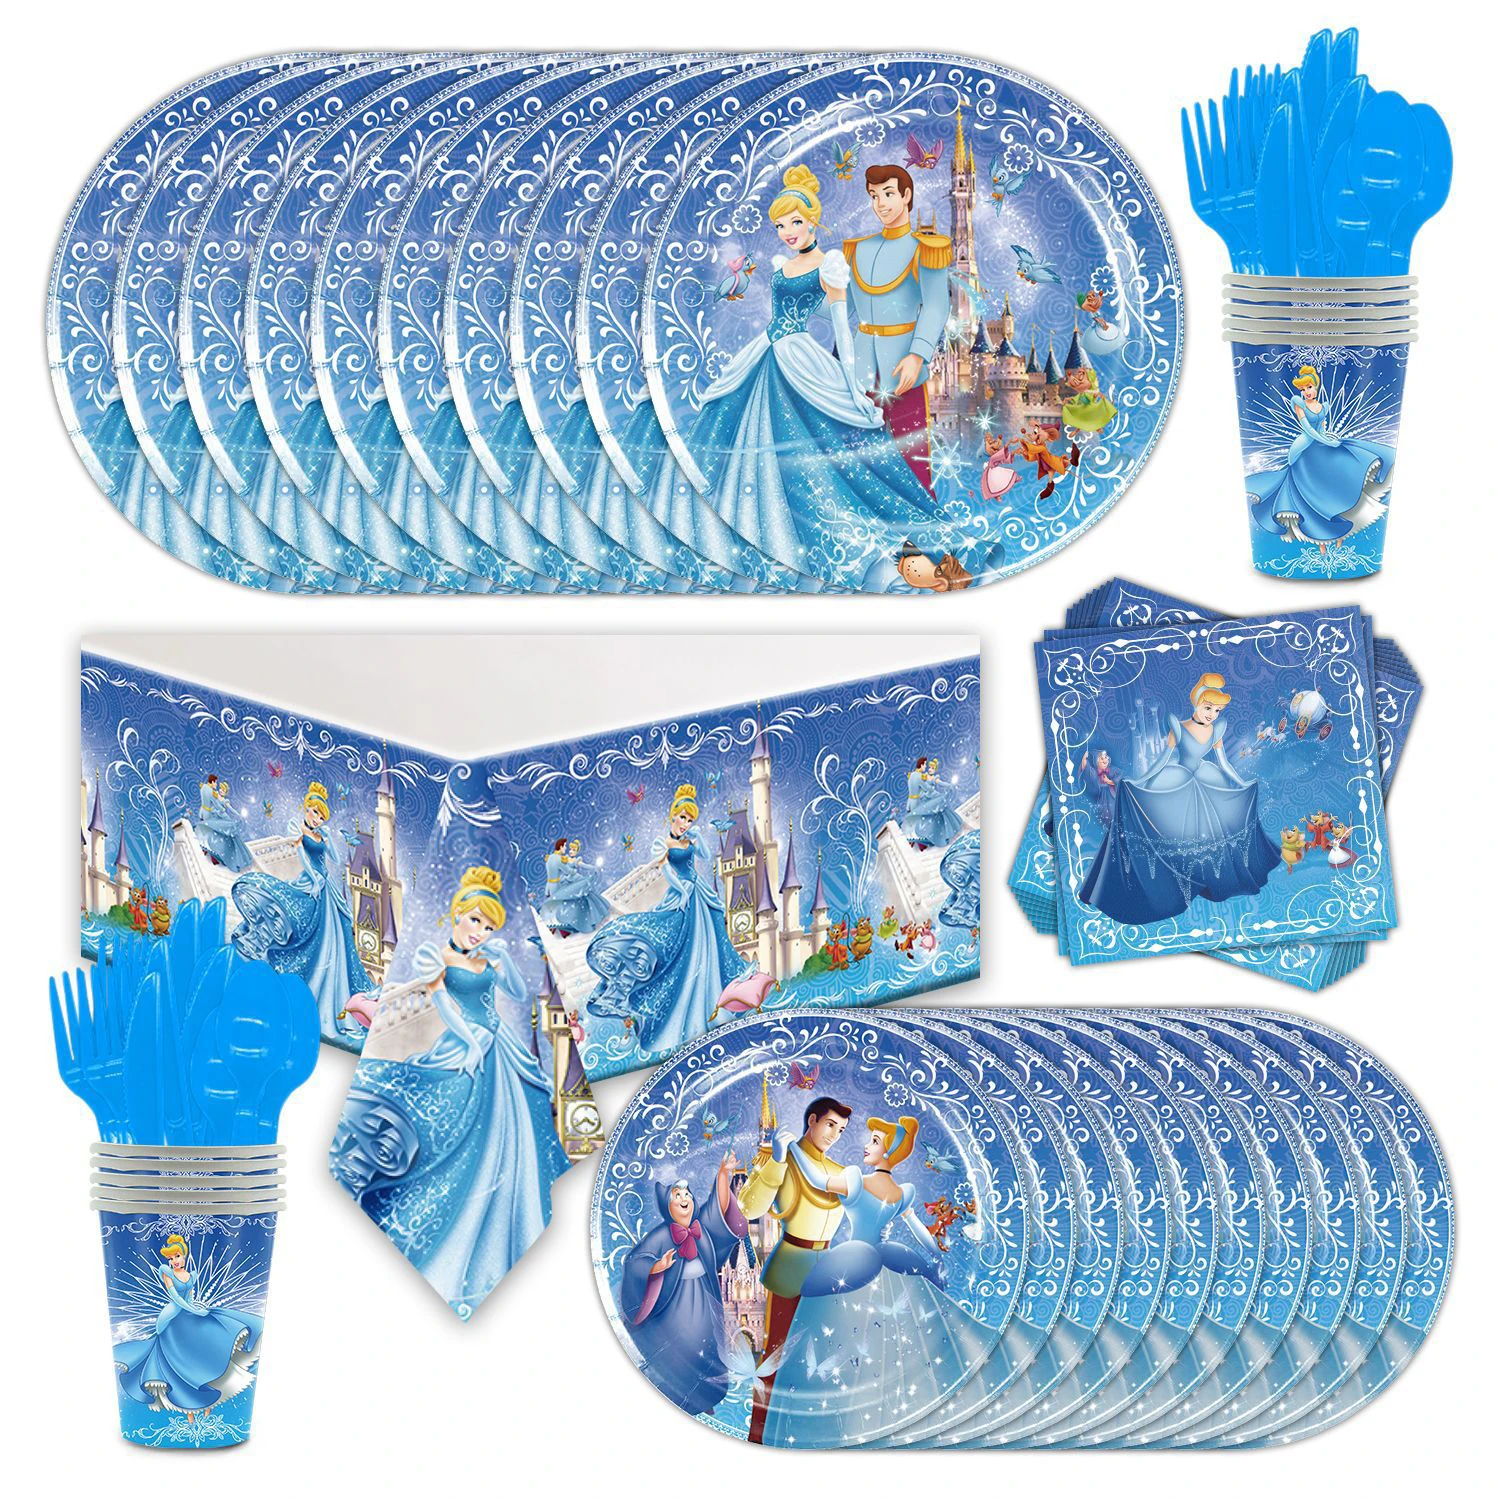 

Disney Cinderella Party Decorations Princess Theme Tableware Set Banner Cups Plates Napkins Tableclothes Girls Party Supplies